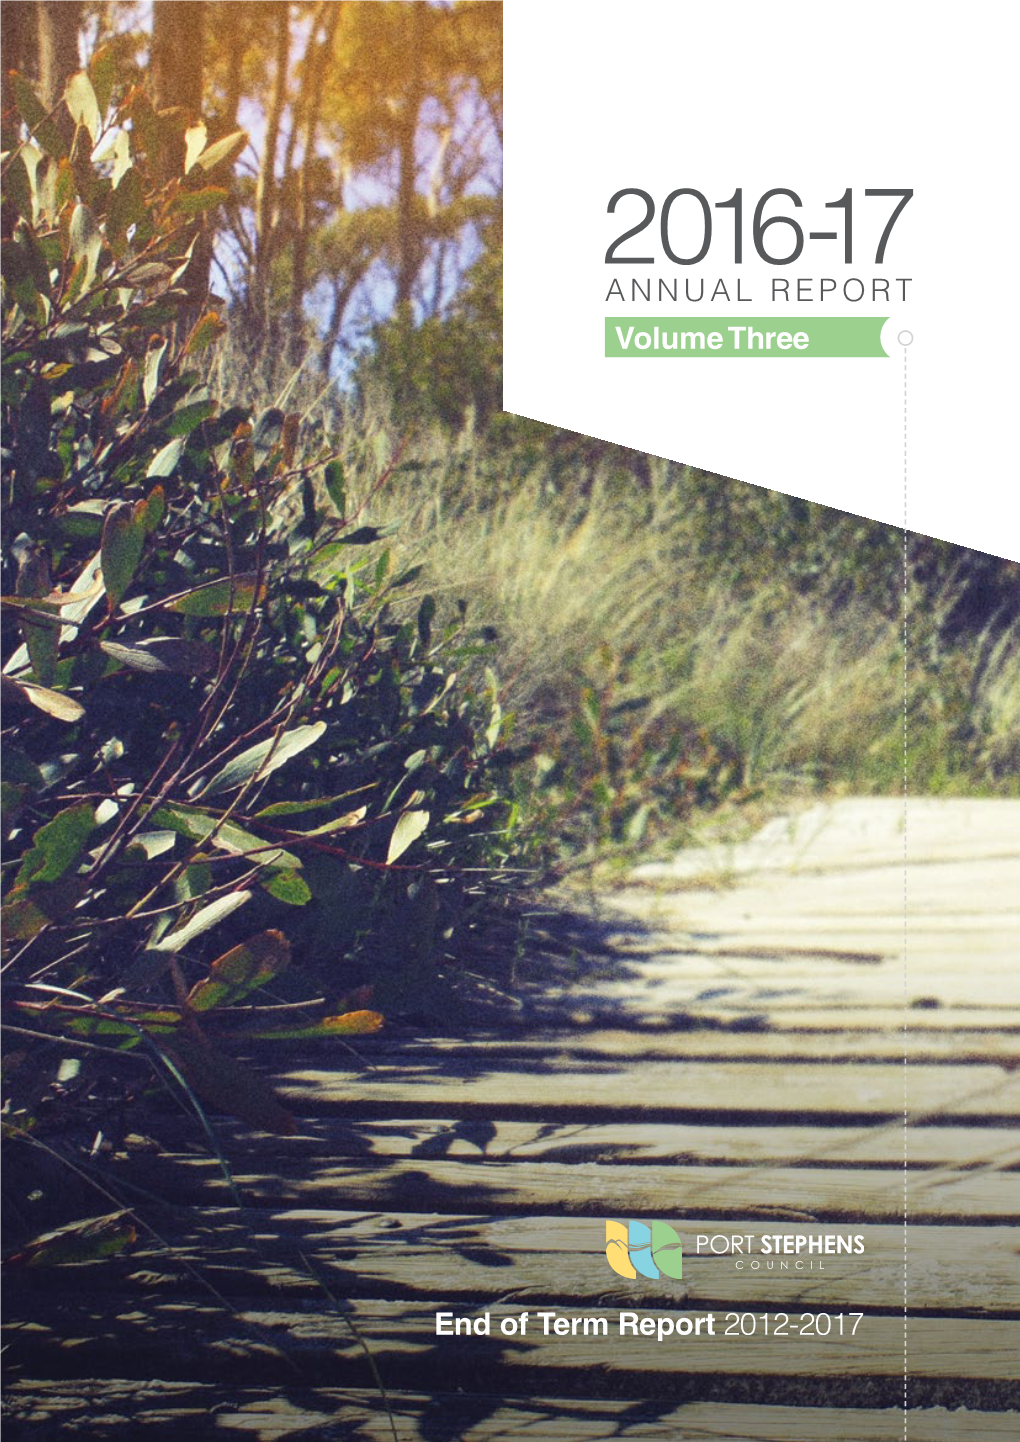 End of Term Report 2012-2017 PORT STEPHENS COUNCIL END of TERM REPORT 2012 - 2017 Port Stephens Council 2012-2017